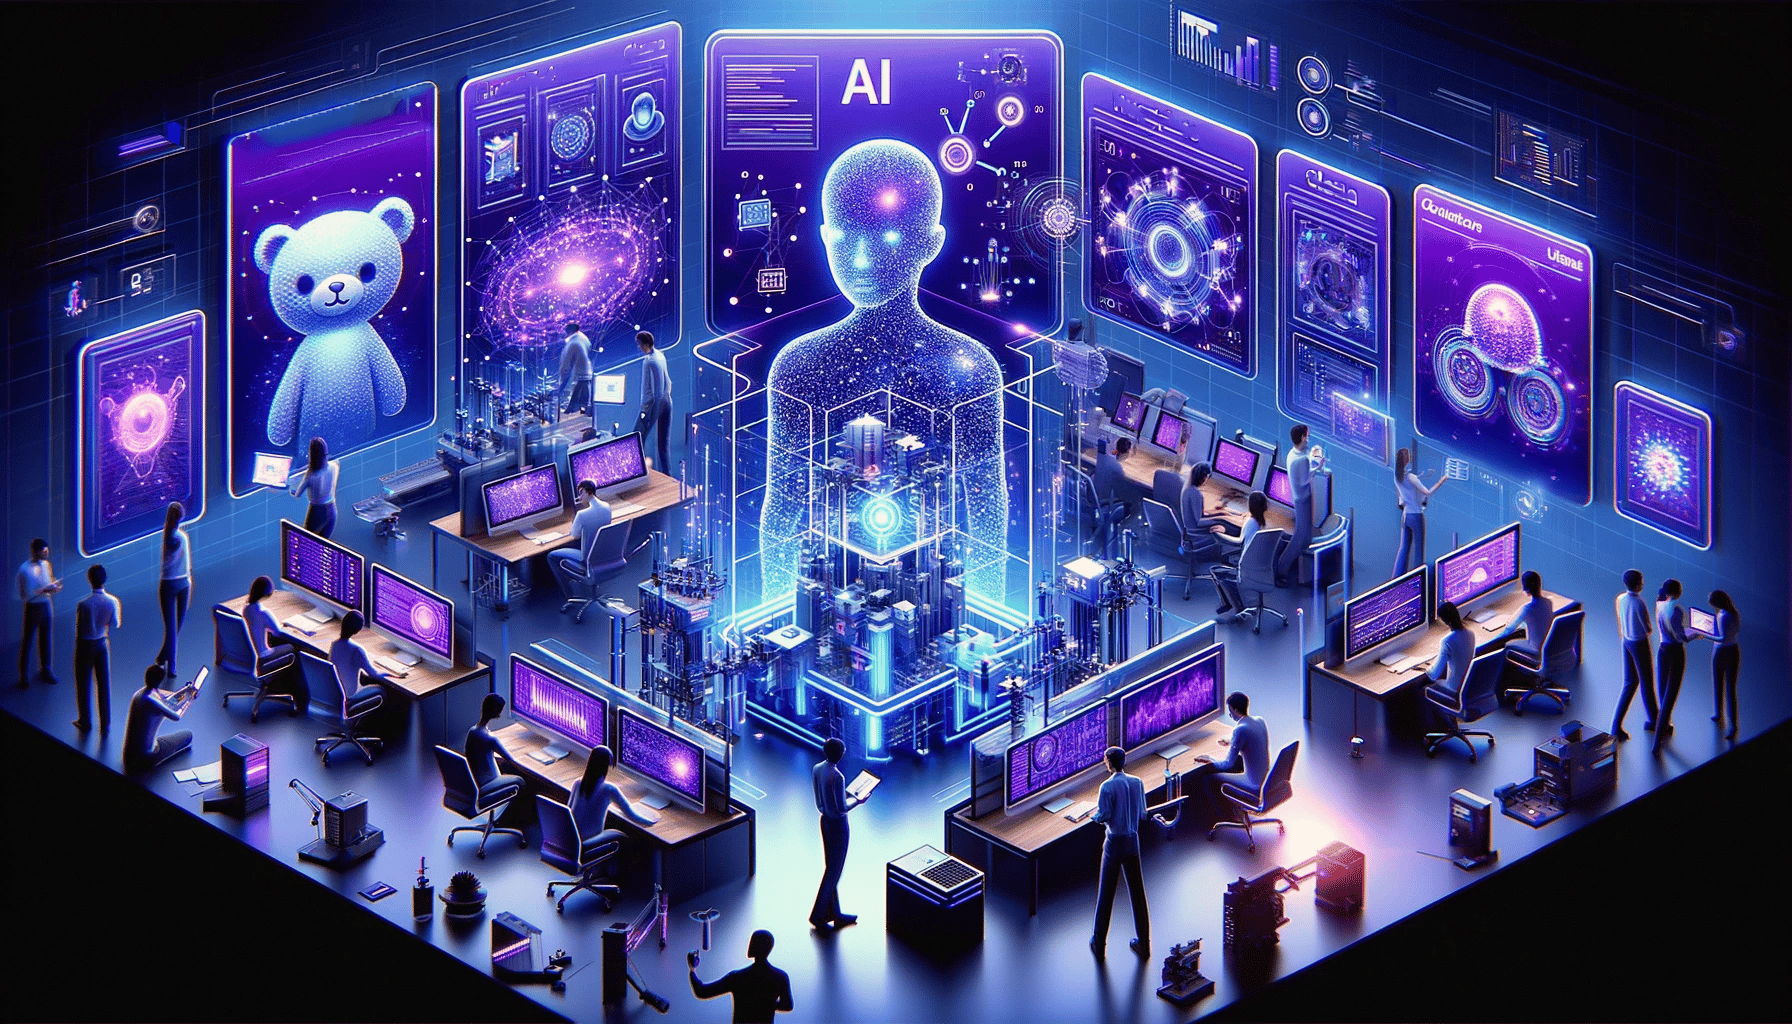 a modern, high-tech environment in shades of purple and blue, representing the expertise of Mactores in AI. Visualize teams 